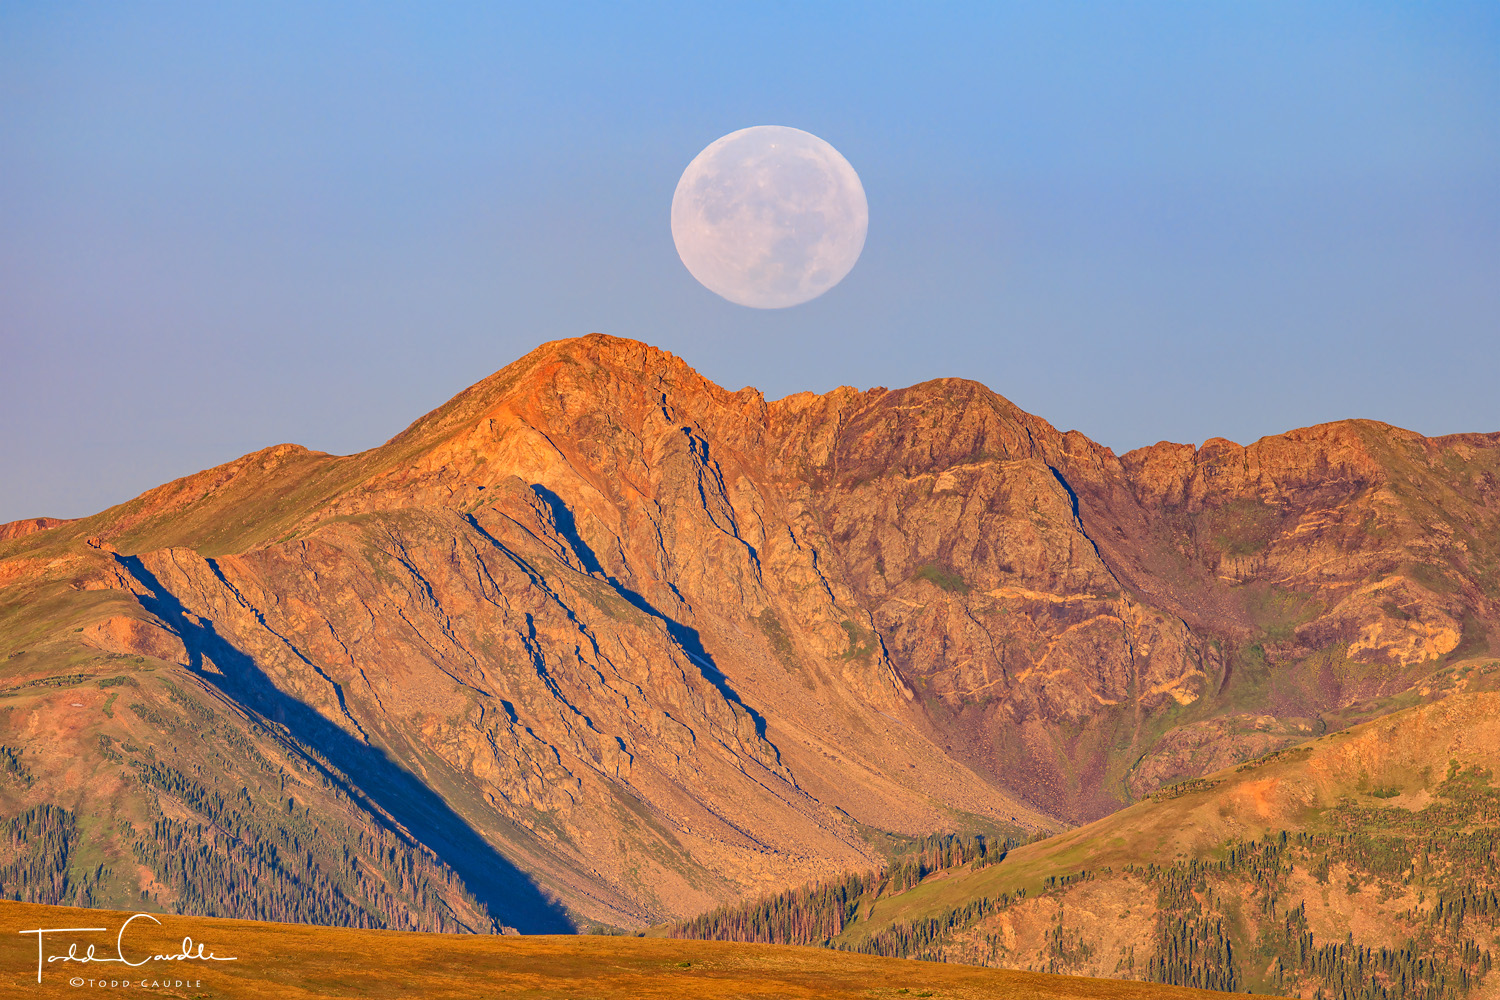 The so-called sturgeon supermoon sets over Bowen Mountain in the Never Summer Range in Rocky Mountain National Park.